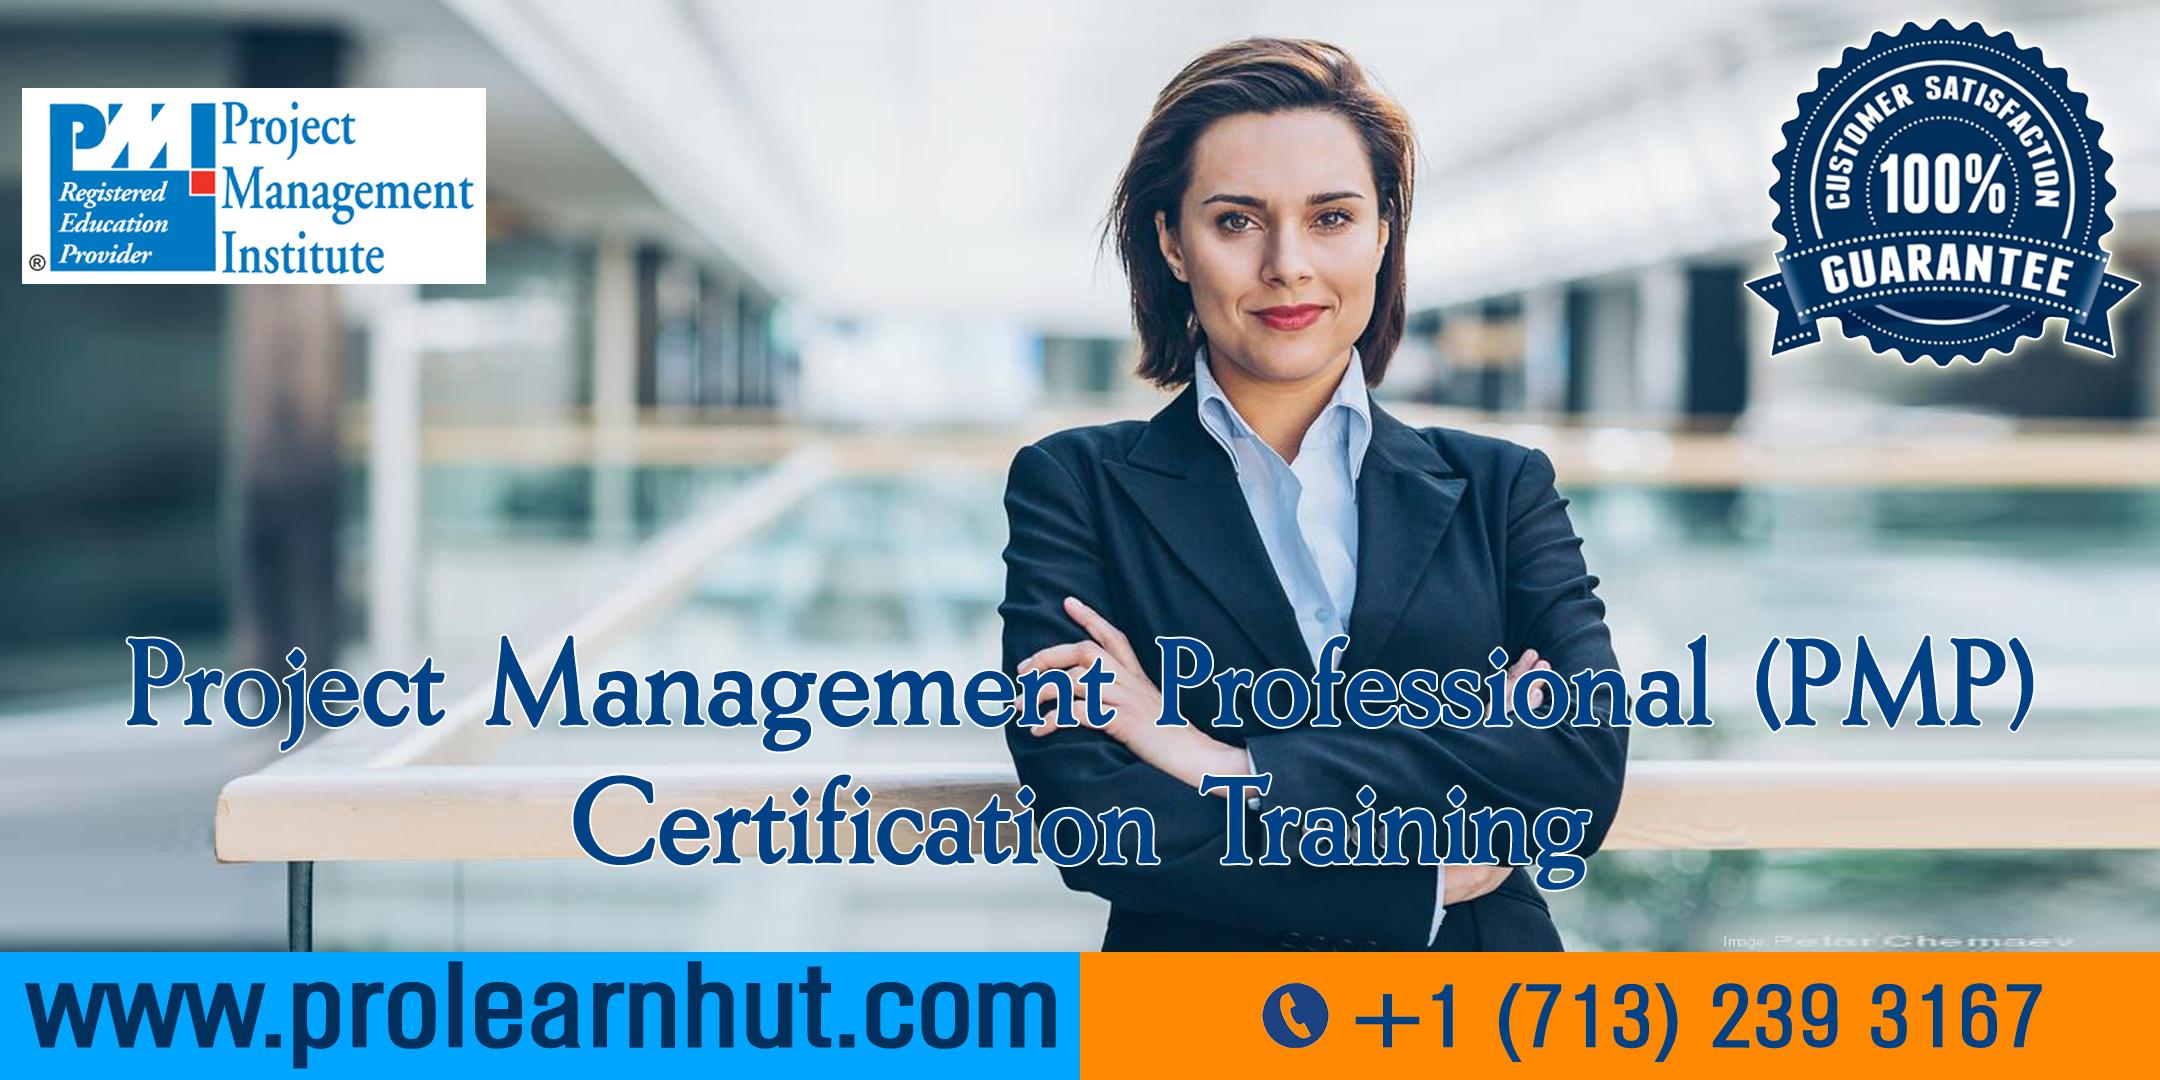 PMP Certification | Project Management Certification| PMP Training in Pearland, TX | ProLearnHut